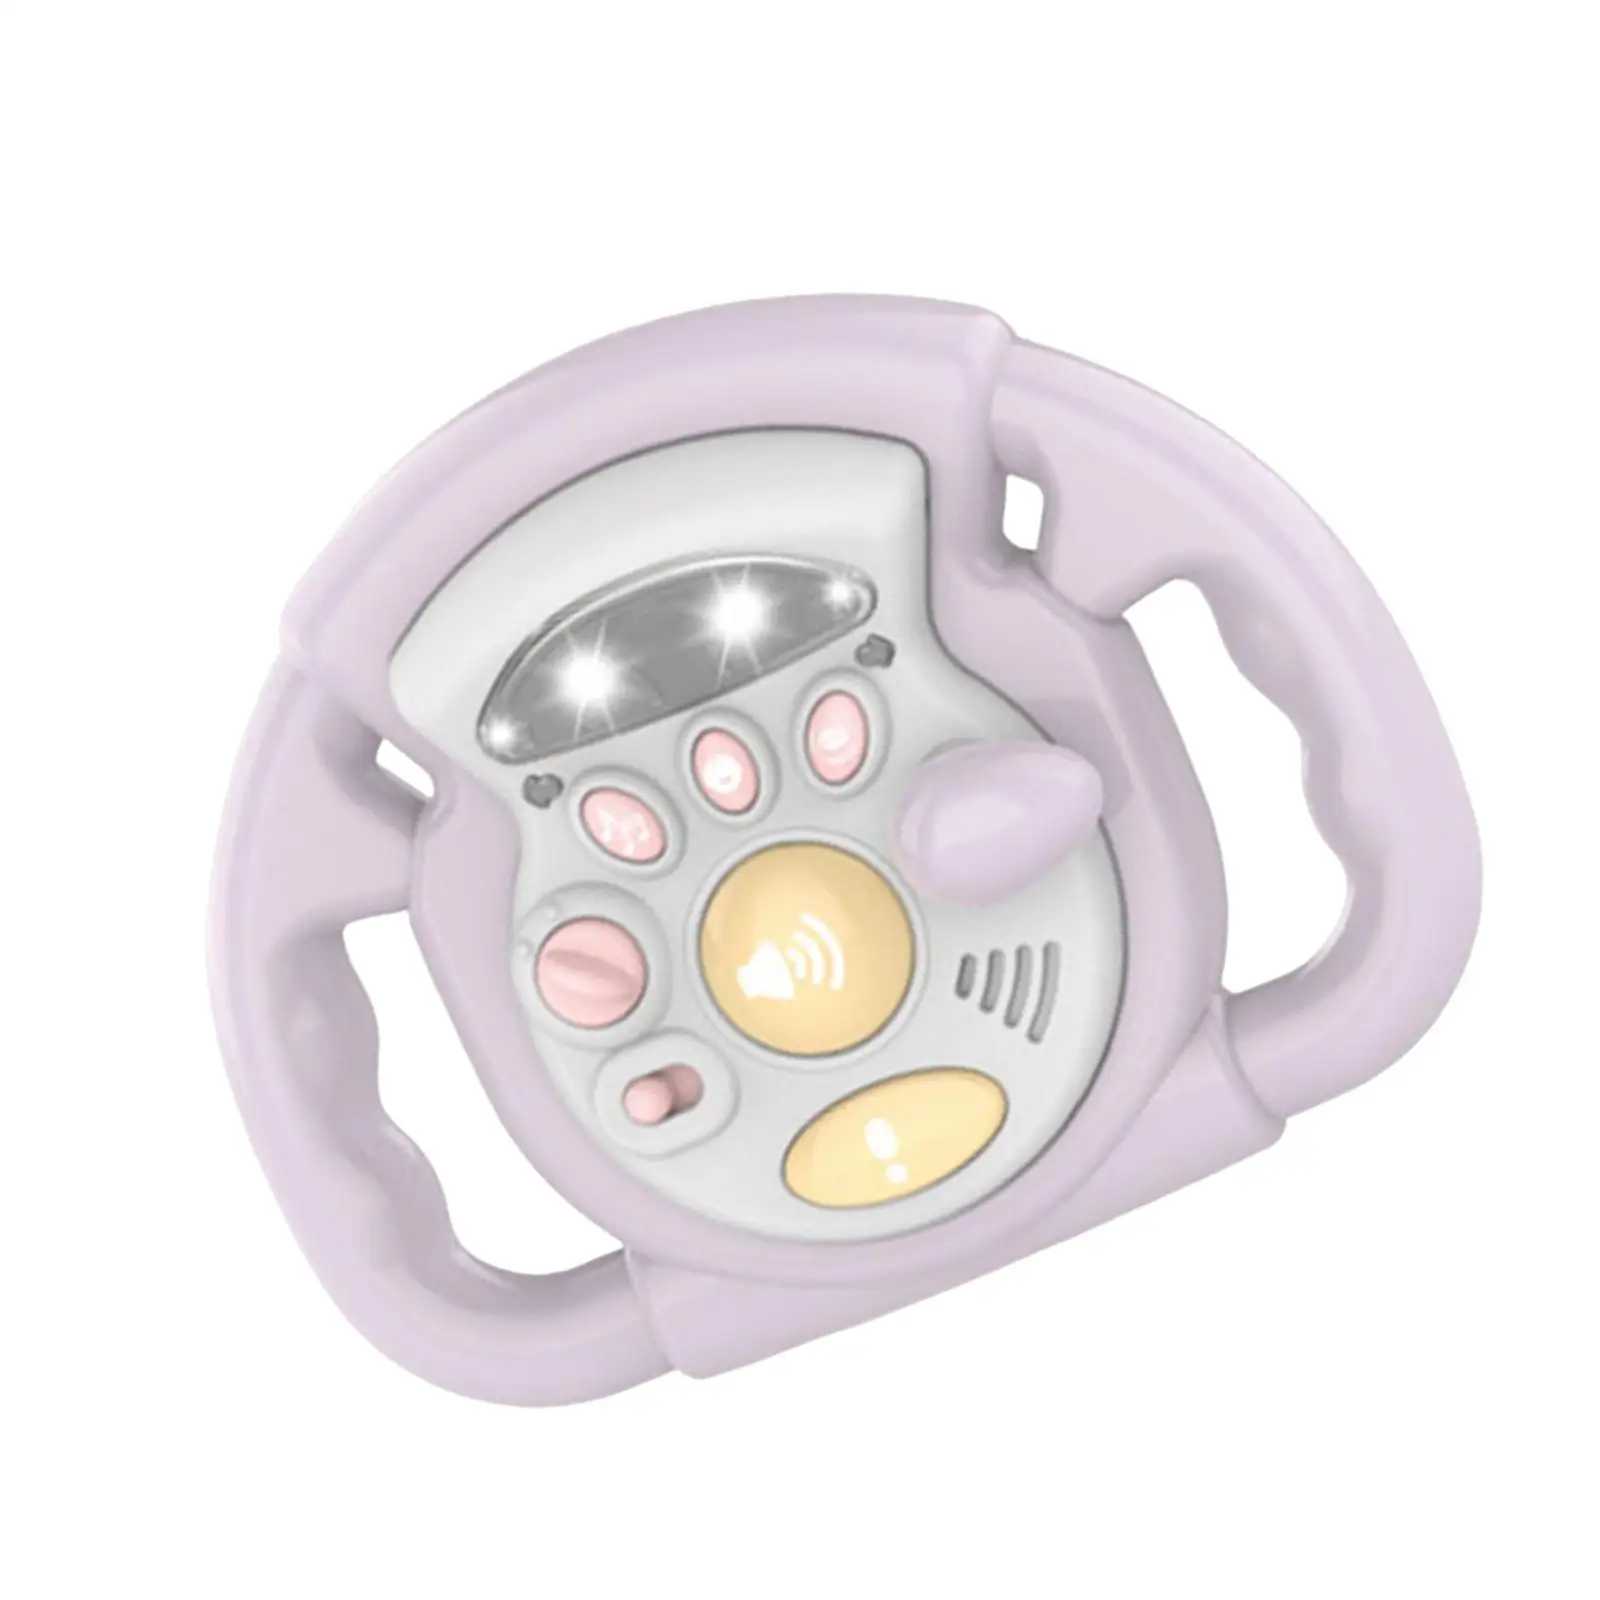 Portable Steering Wheel Toys 360 Degree Rotation with Light and Music Durable Driving Controller for Toddlers Interactive Toy